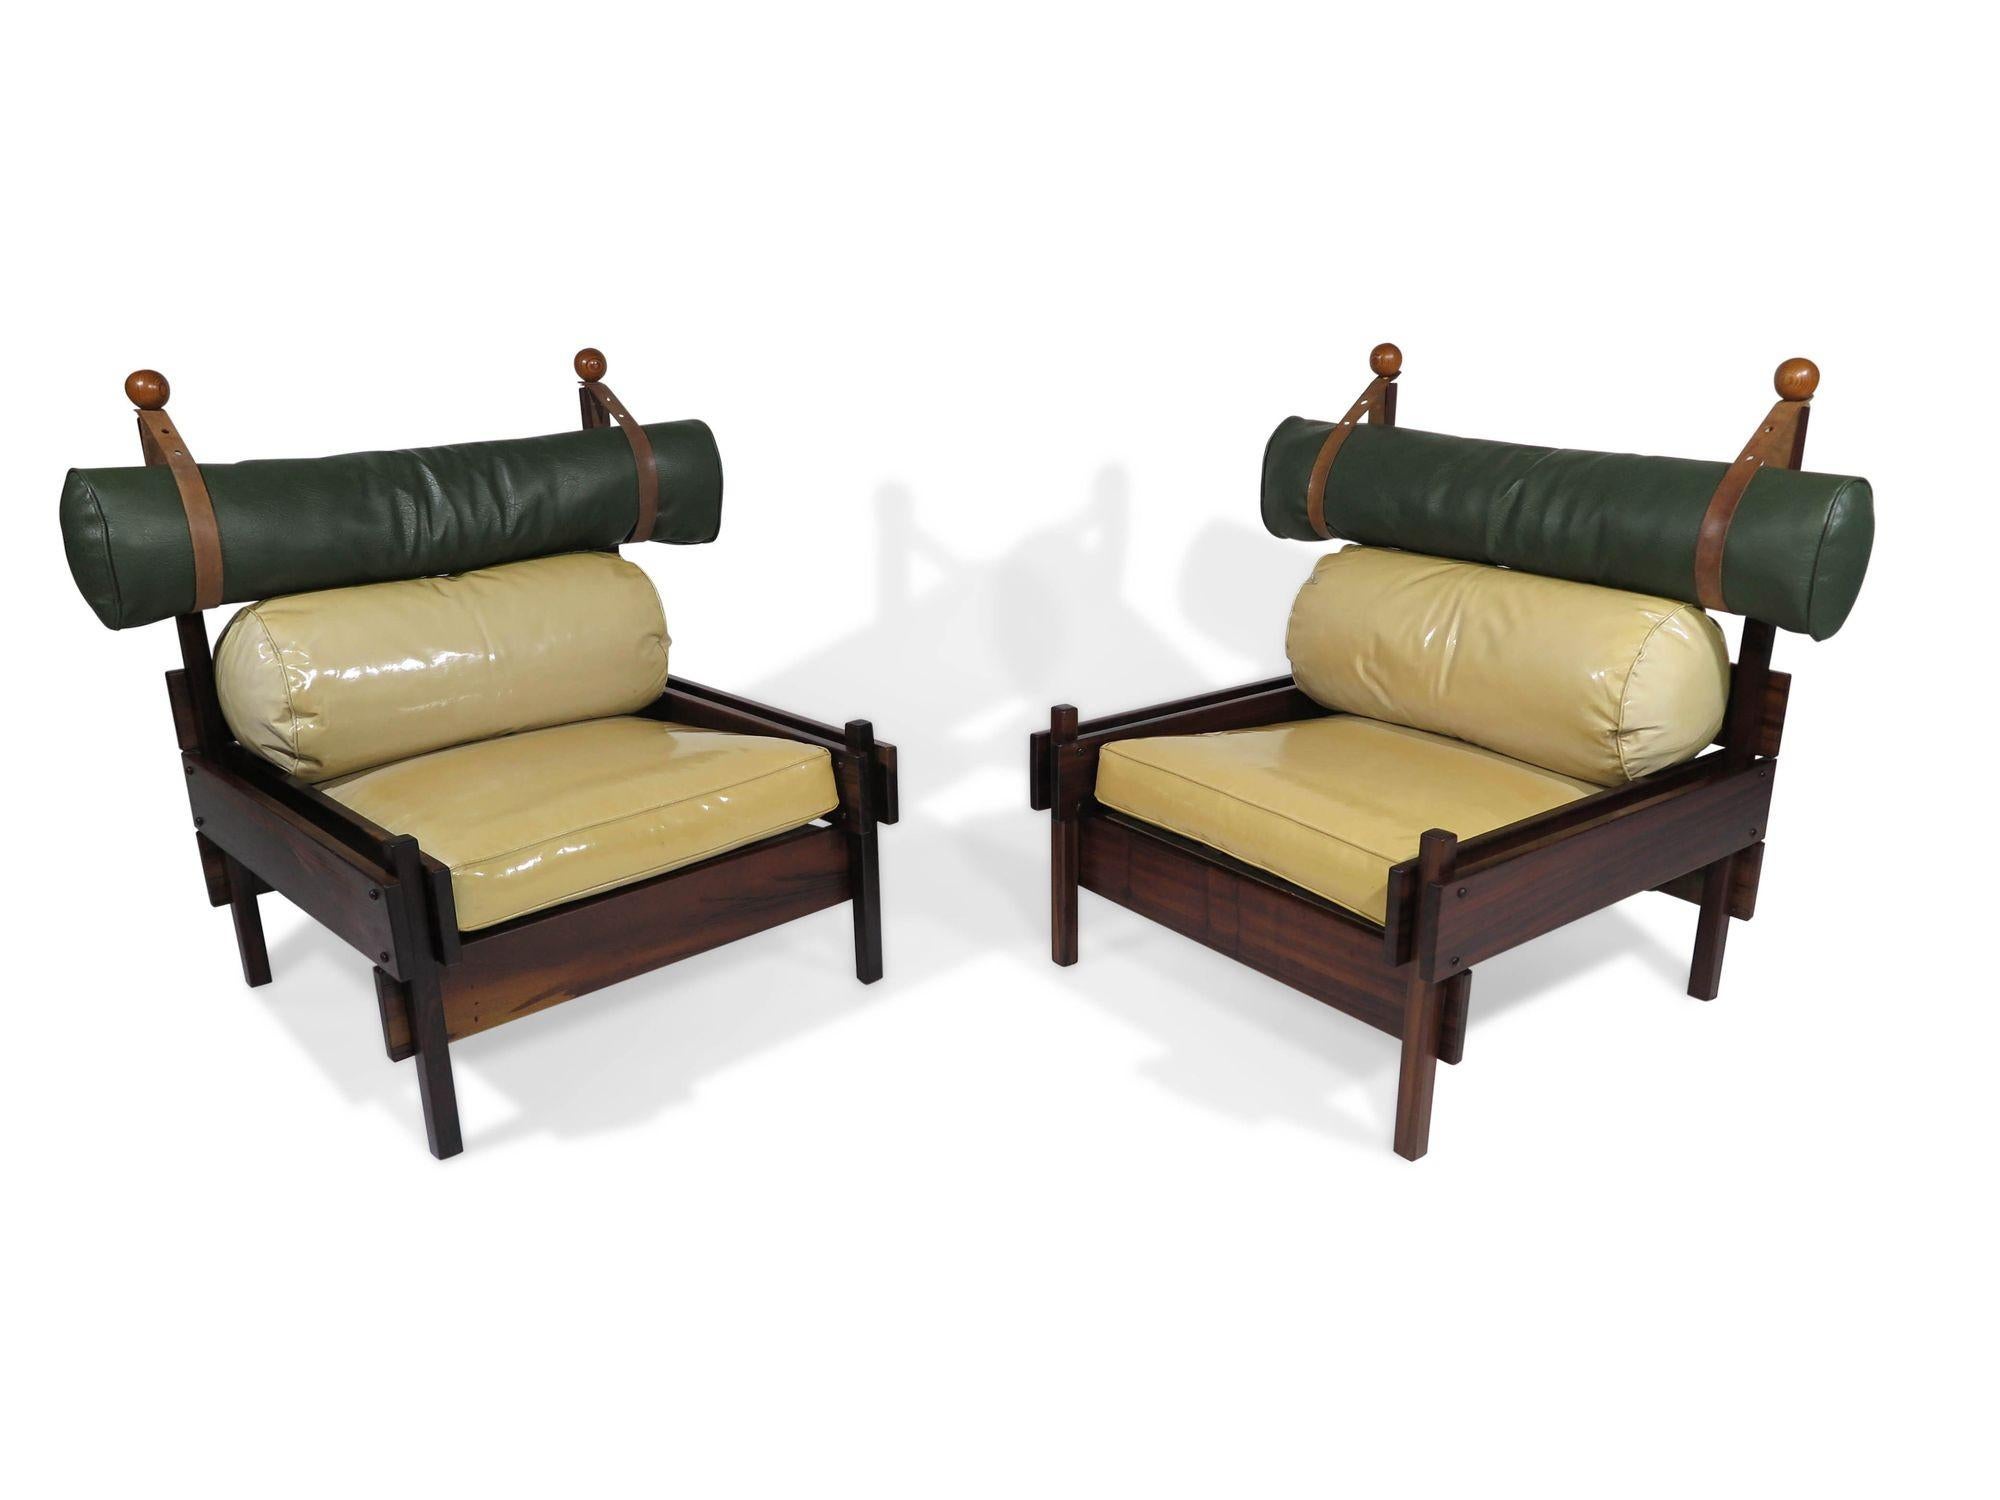 Pair of Sergio Rodrigues Tonico Lounge Chairs, 1962, Brazil For Sale 6